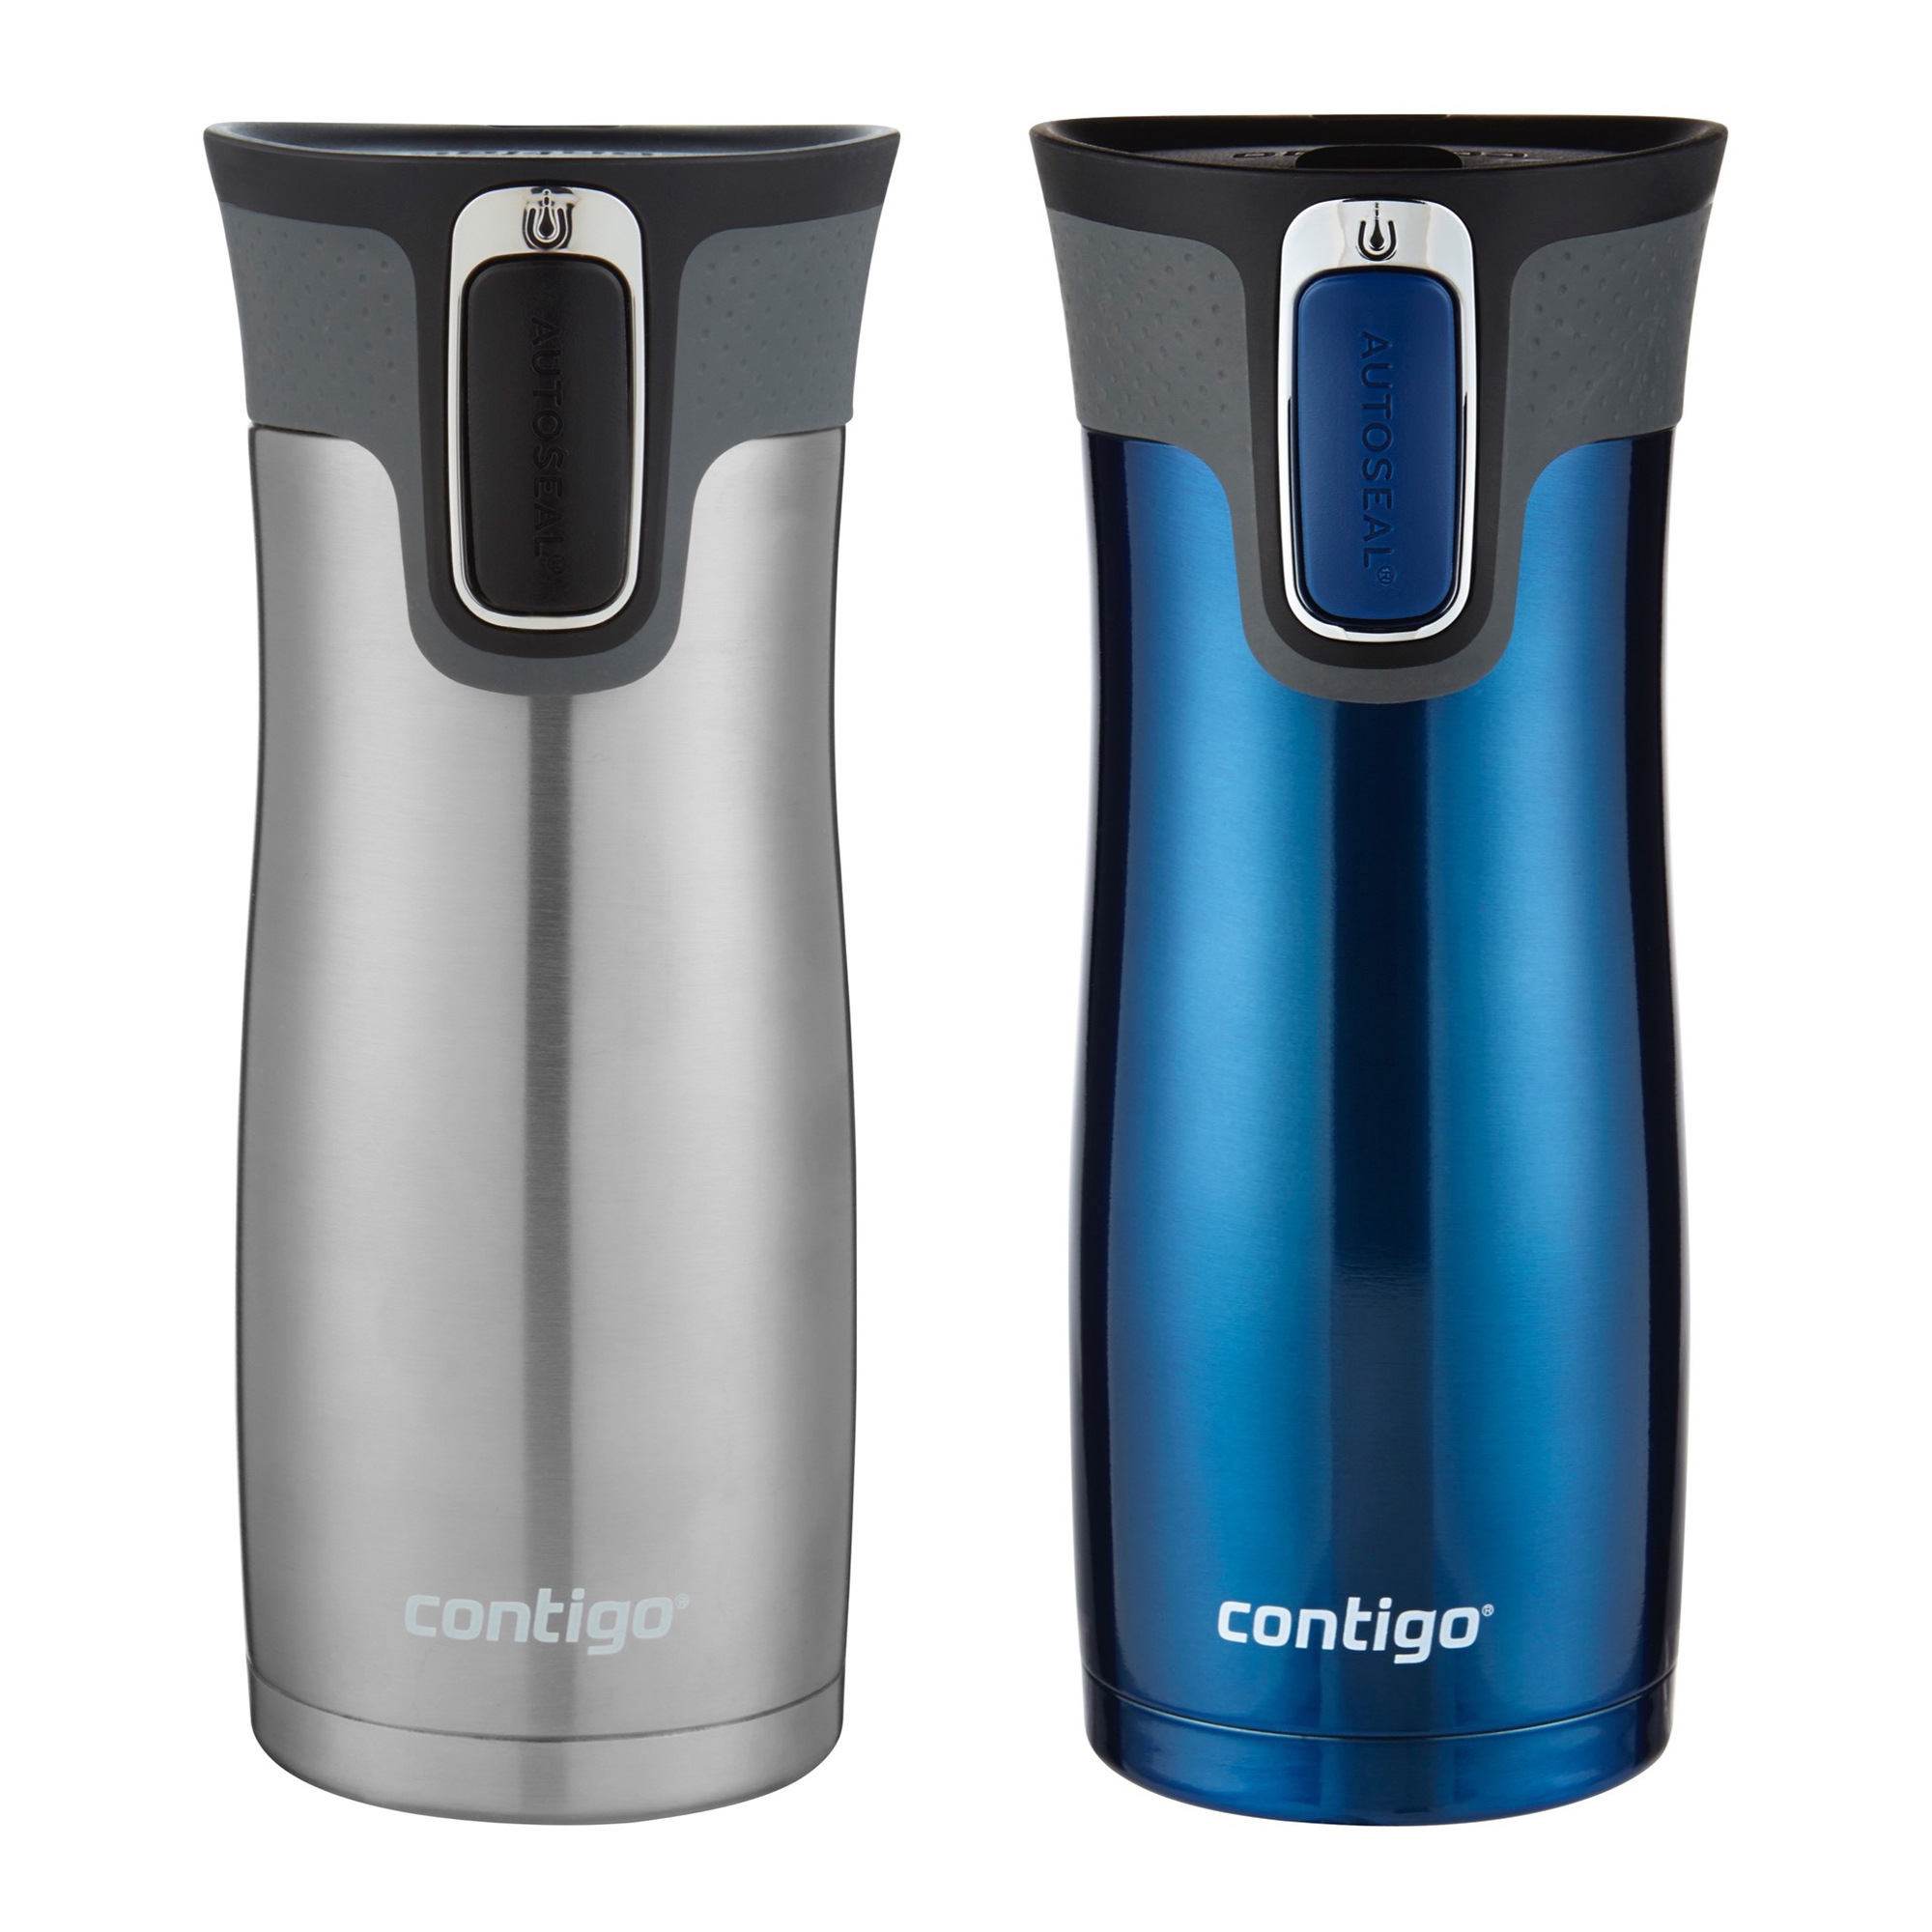 Contigo Autoseal West Loop Vacuum-insulated Stainless Steel Travel Mug with Easy-clean Lid, 16 Oz., Monaco & Stainless Steel, 2-Pack - image 1 of 8